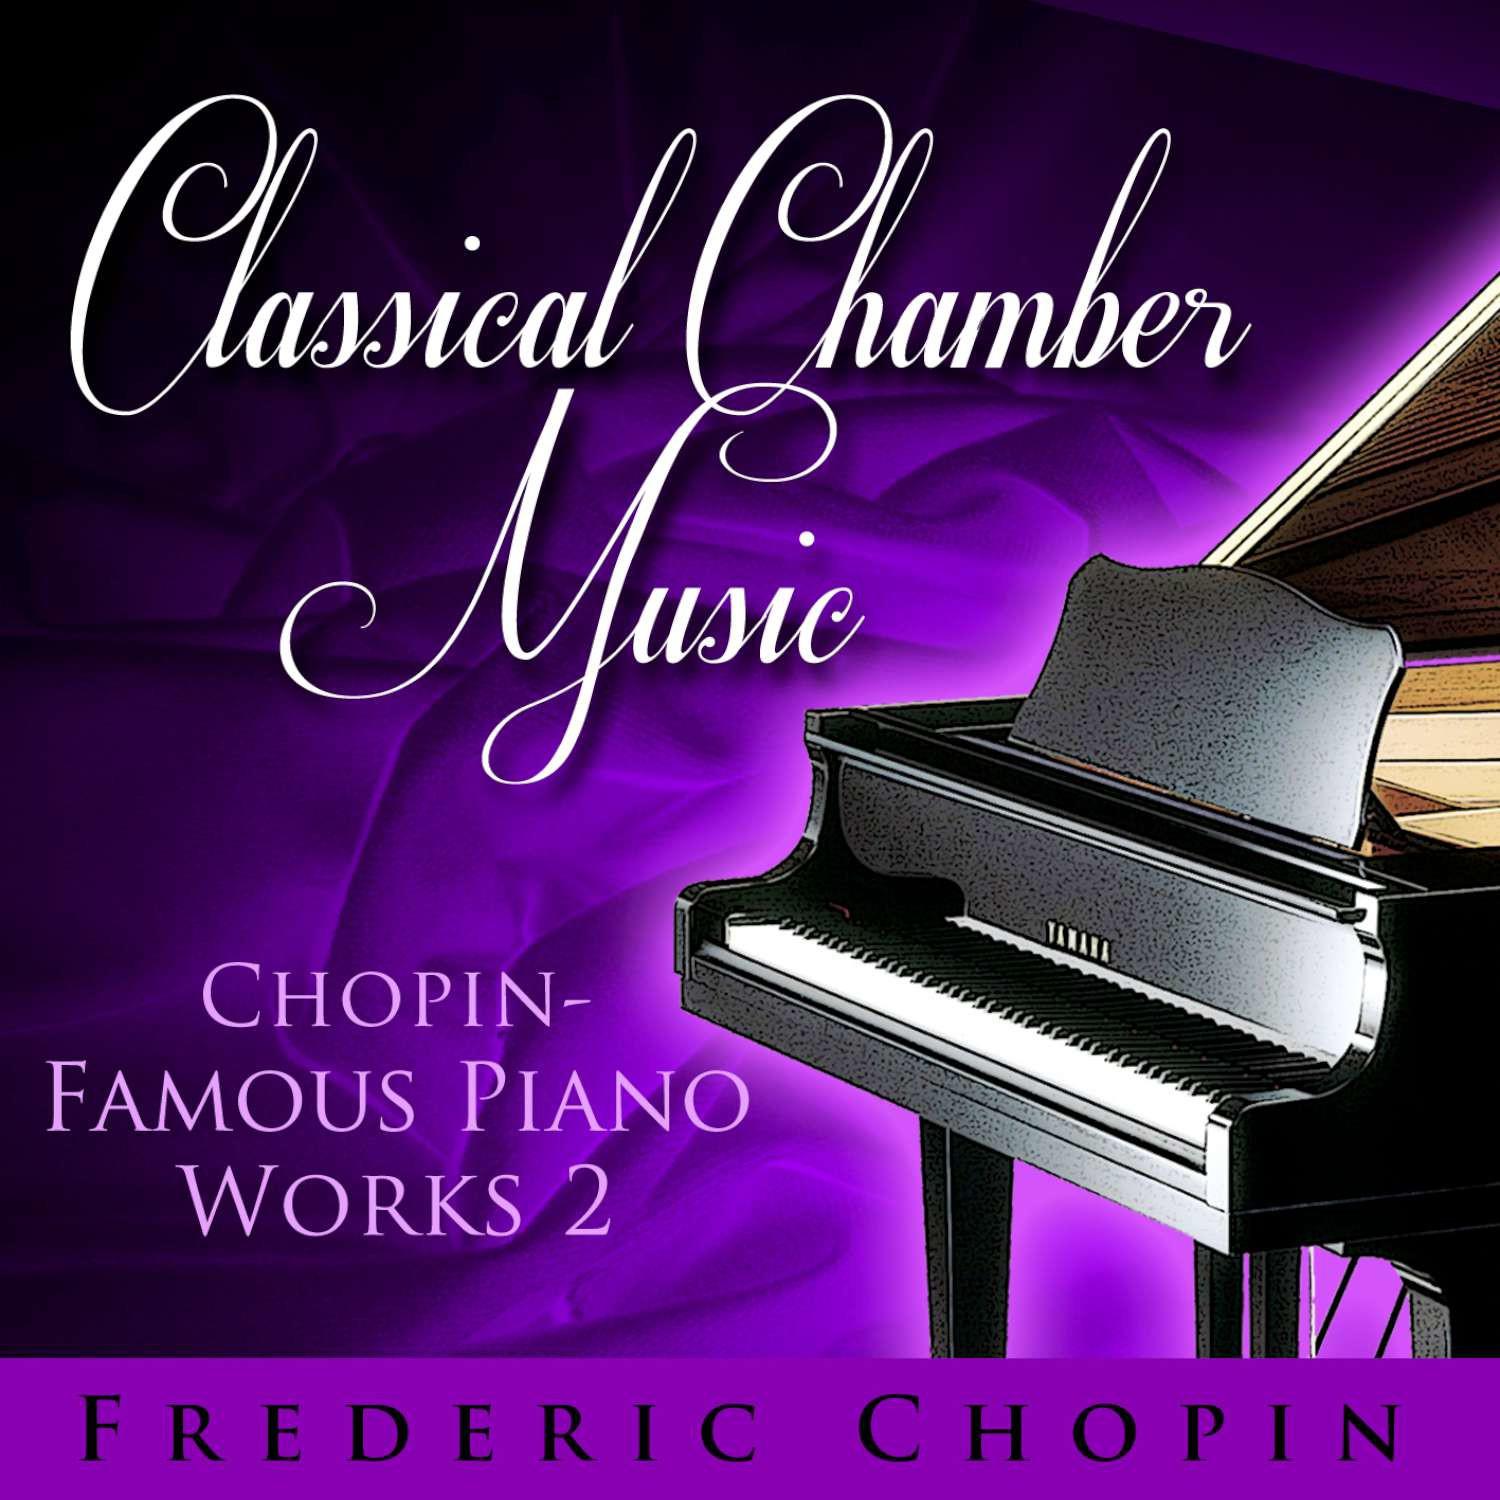 Classical Chamber Music - Chopin-Famous Piano Works 2